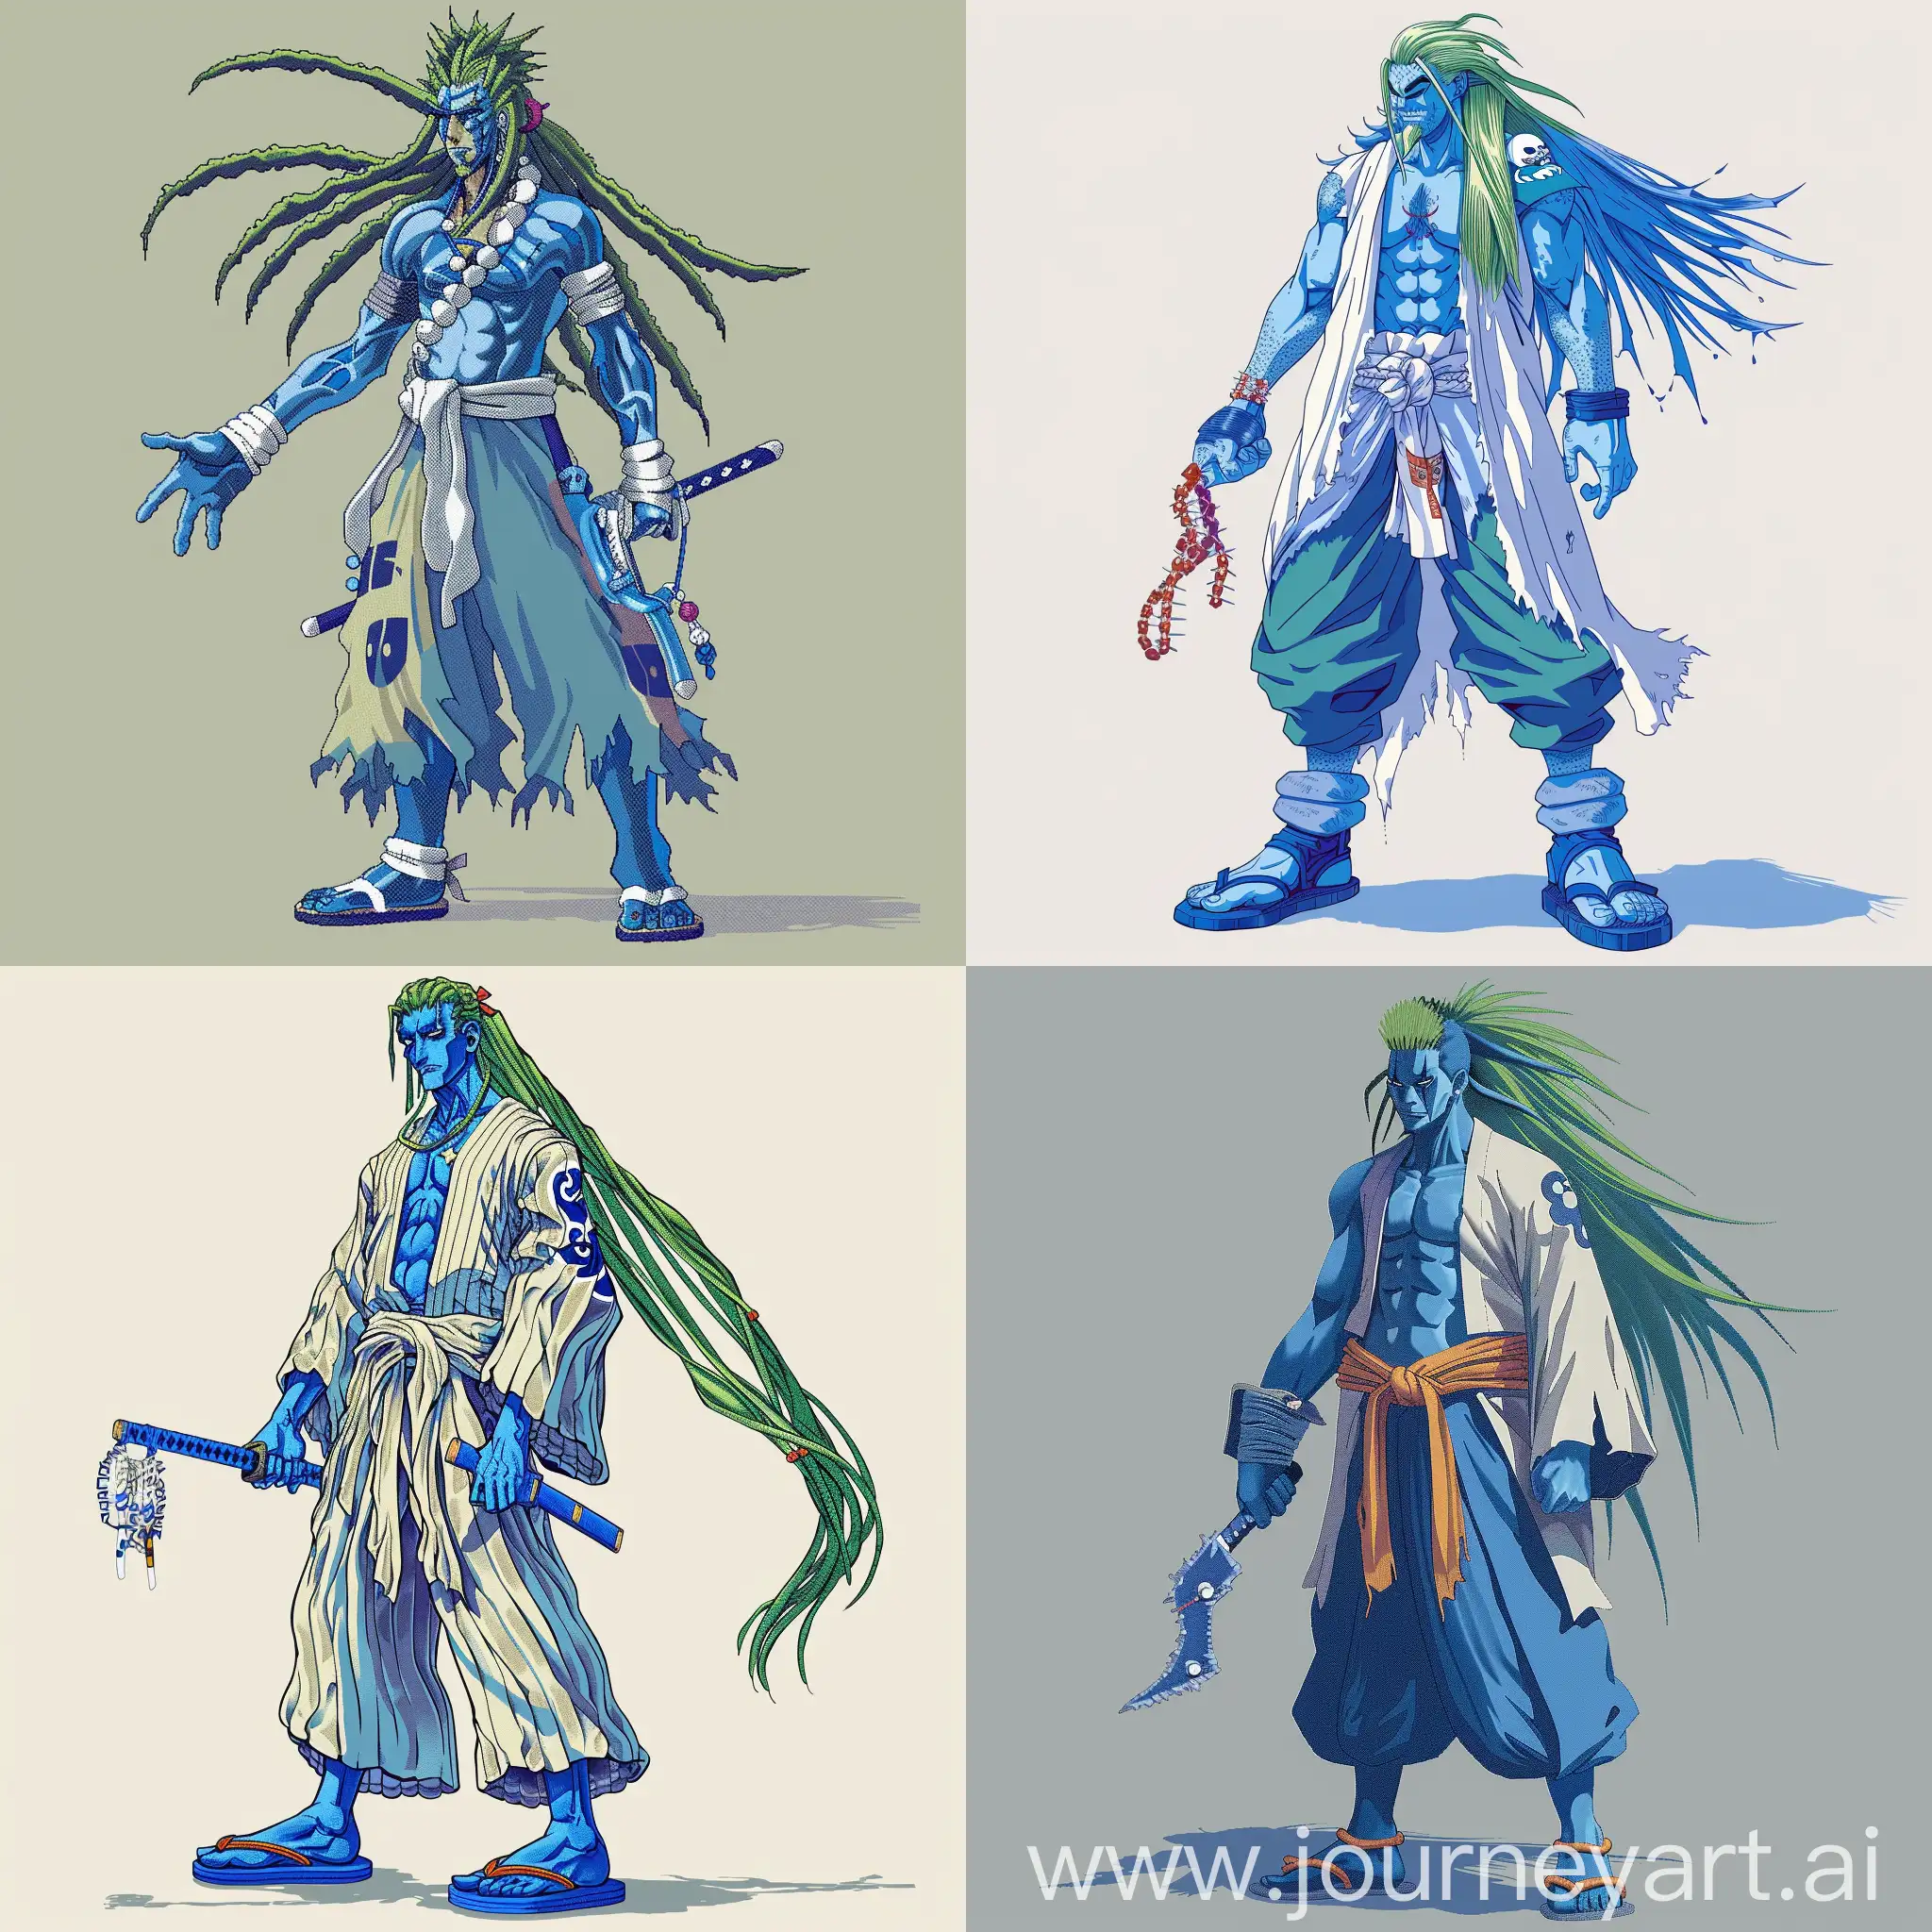 BlueSkinned-Warrior-with-Long-Green-Hair-and-Traditional-Bleach-Outfit